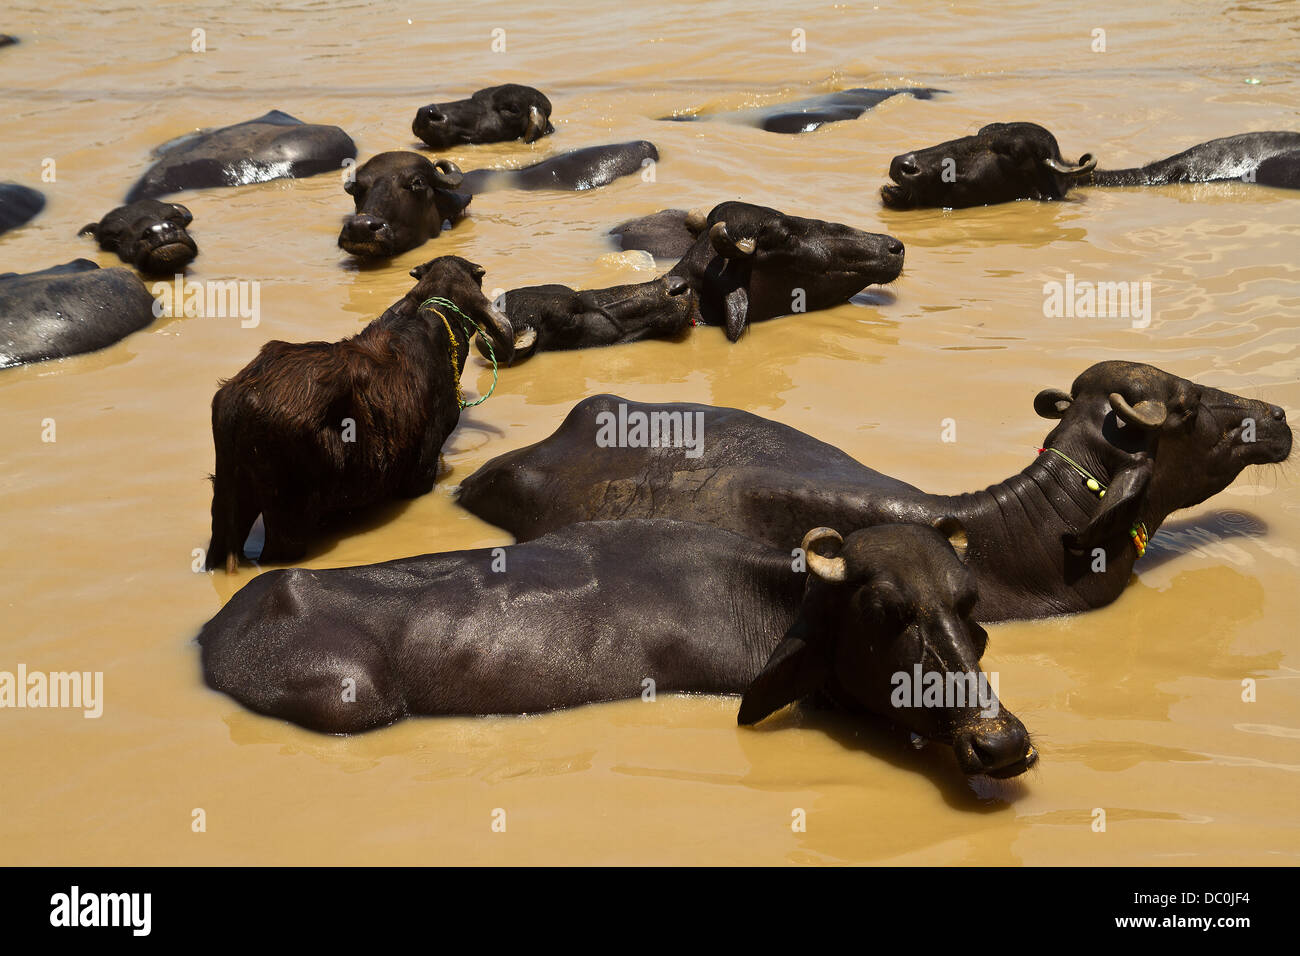 cows bathing in the River Ganges in Varanasi in India Stock Photo